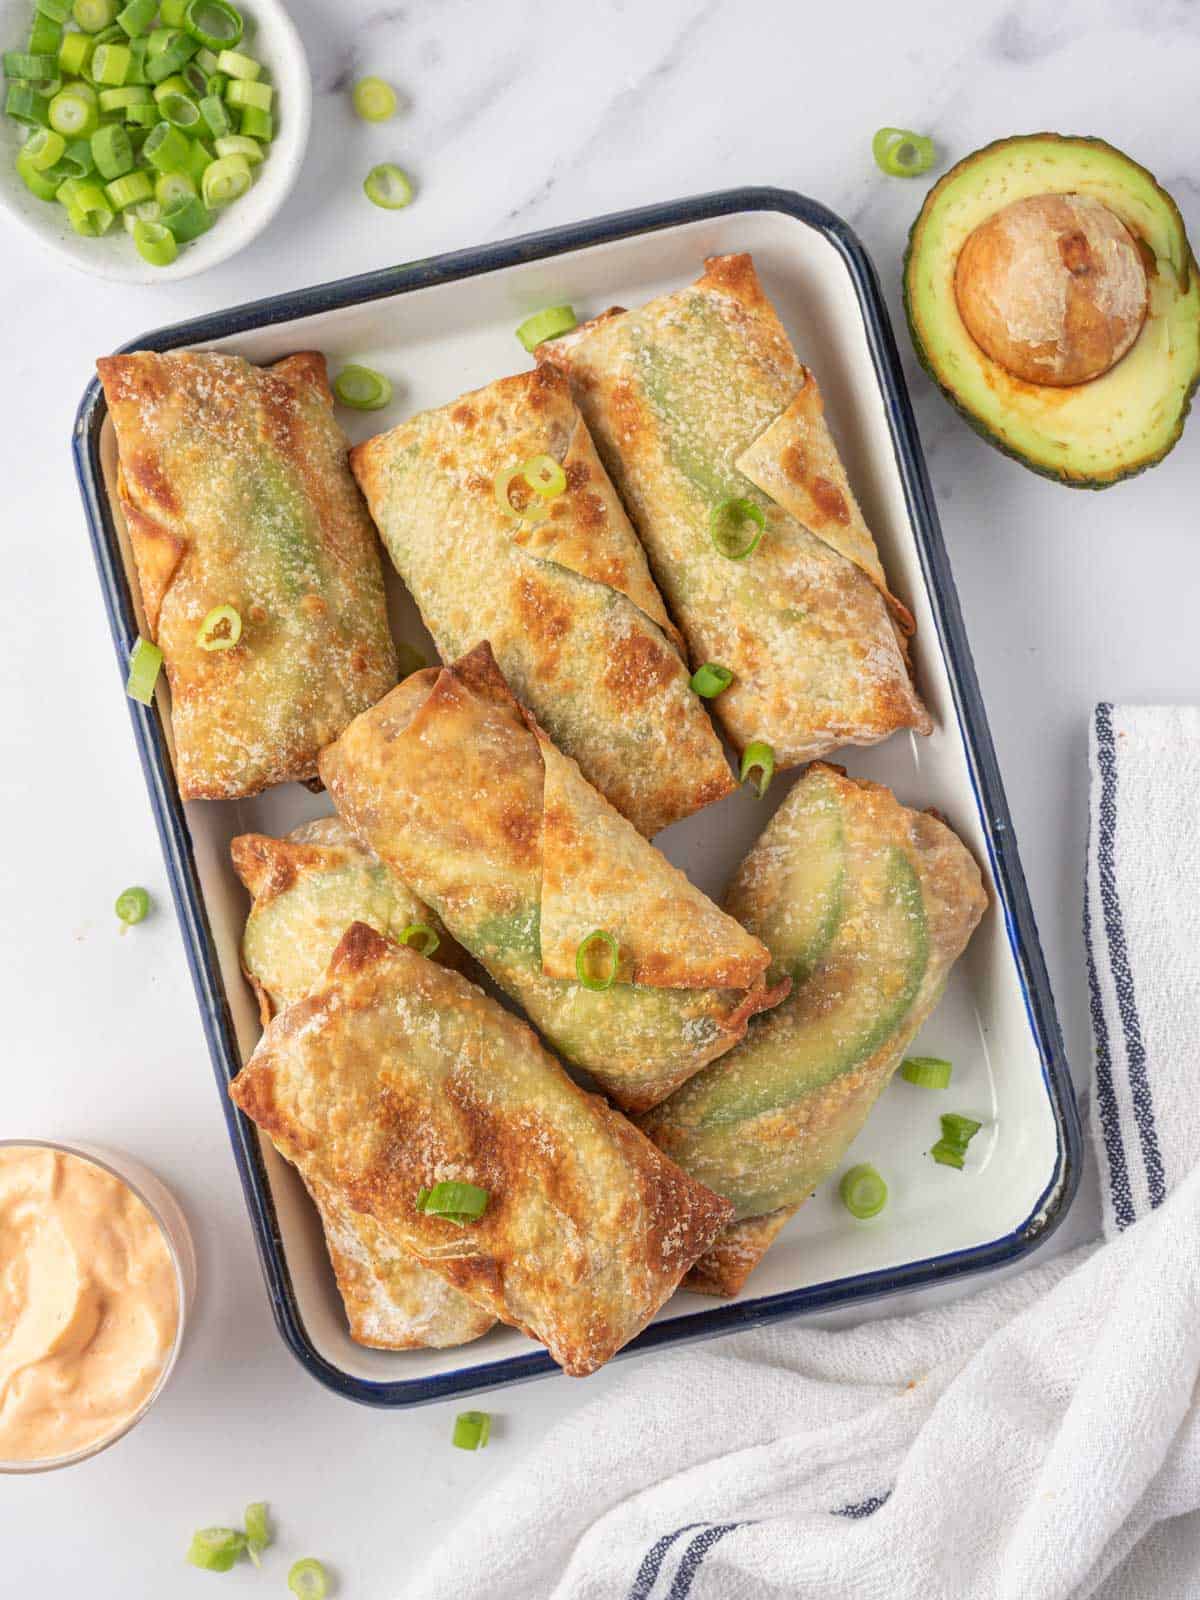 A tray of salmon egg rolls garnished with green onions.